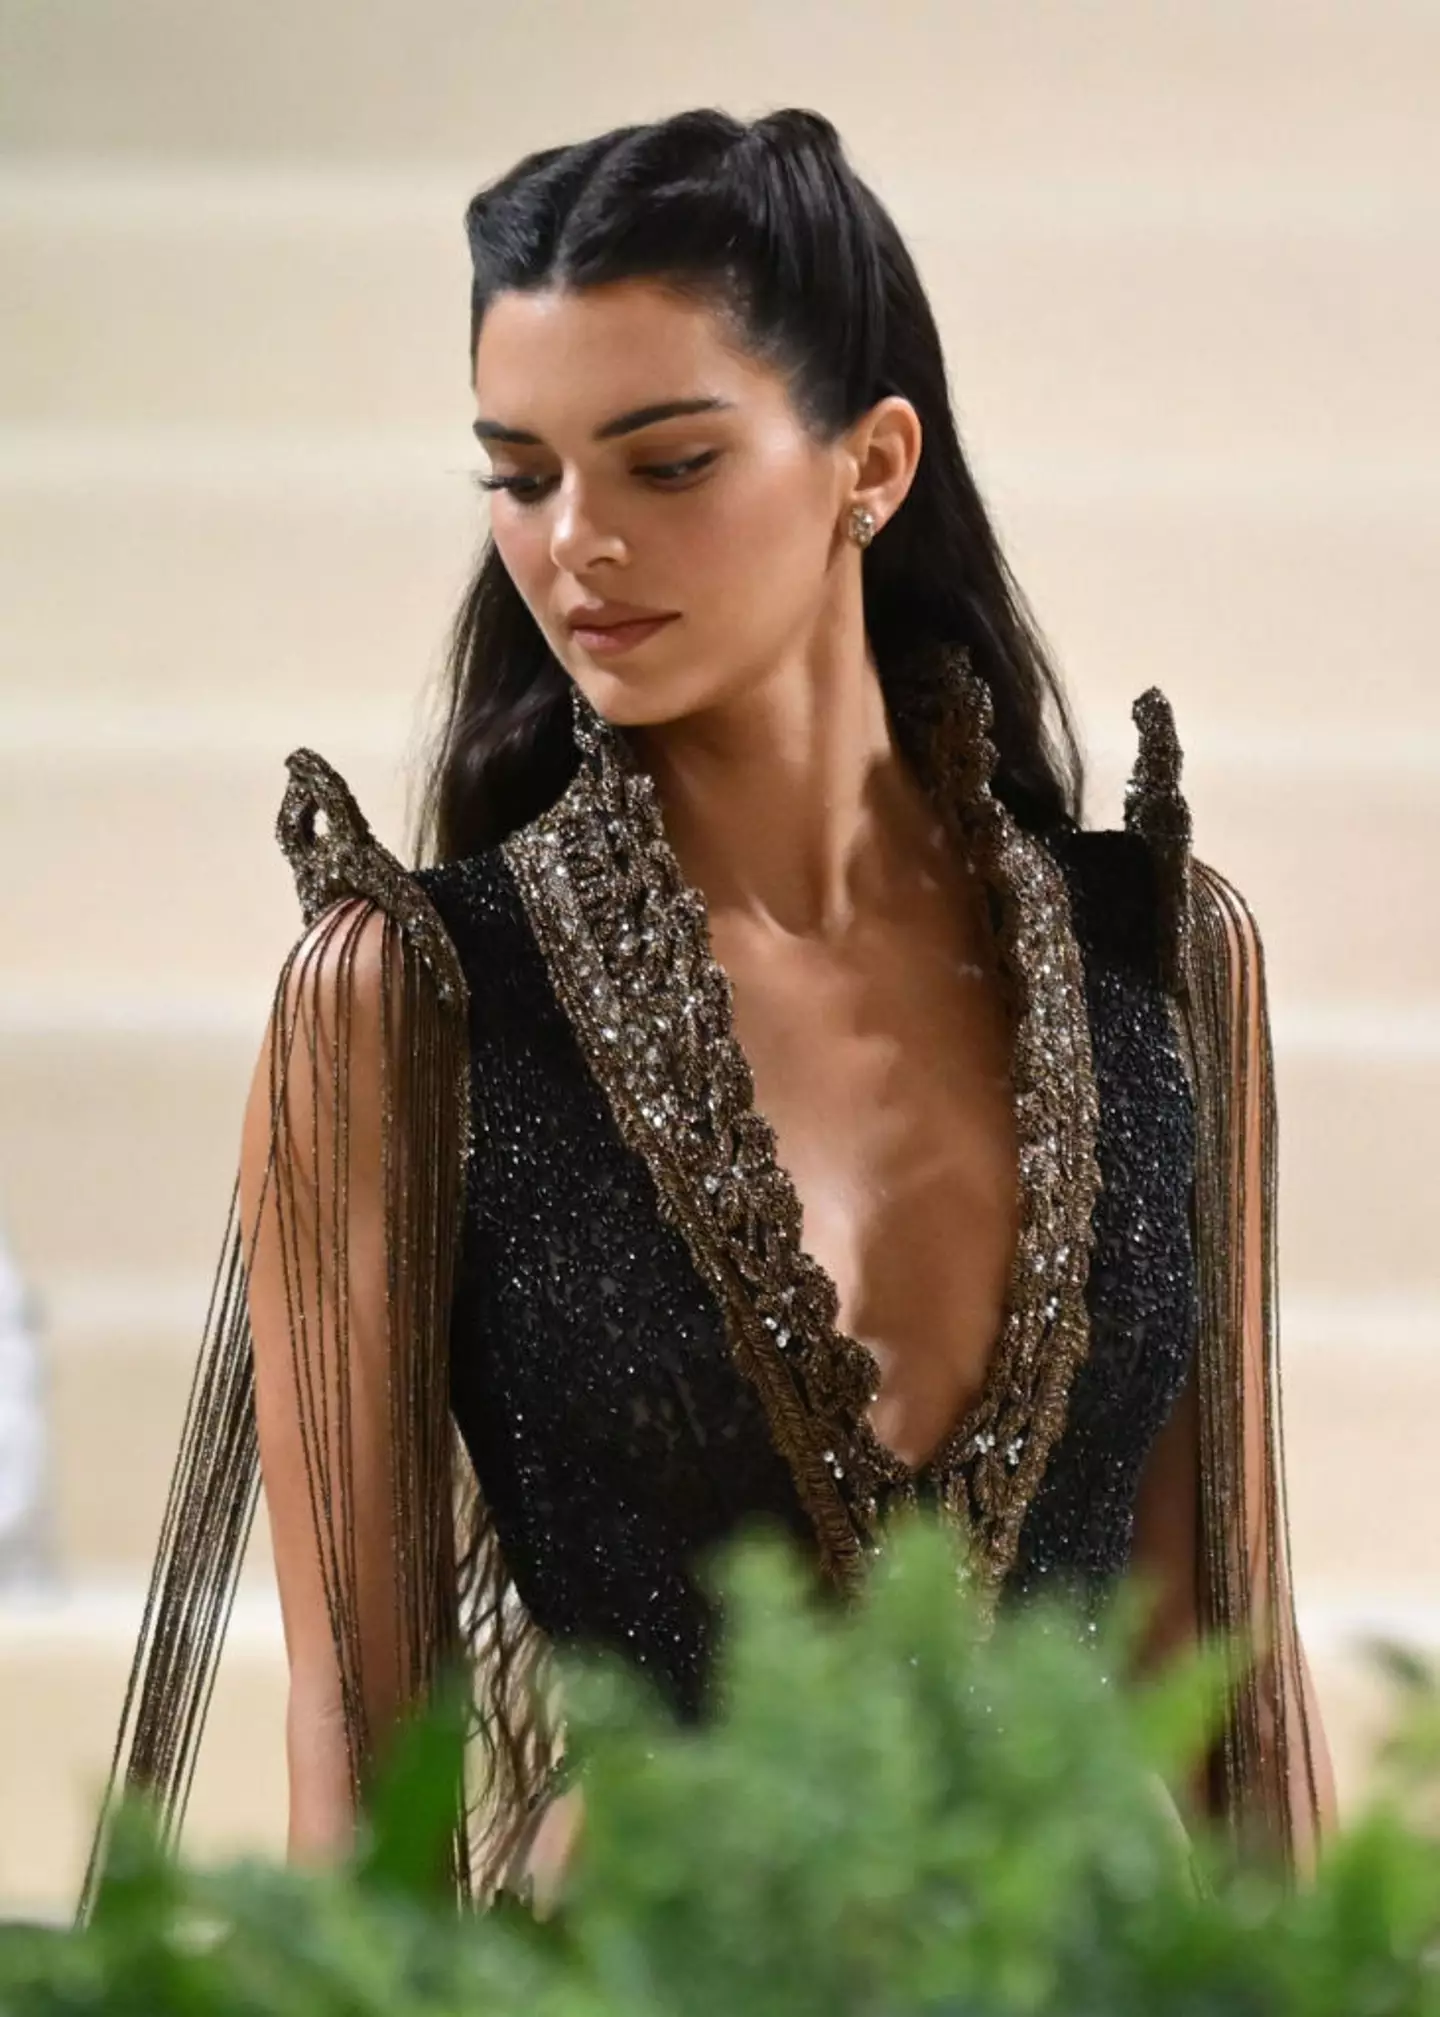 A body language expert claimed that Kendall Jenner exhibited a certain behavior that set her apart from her famous family.  (NDZ/Star Max / Contributor / Getty Images)